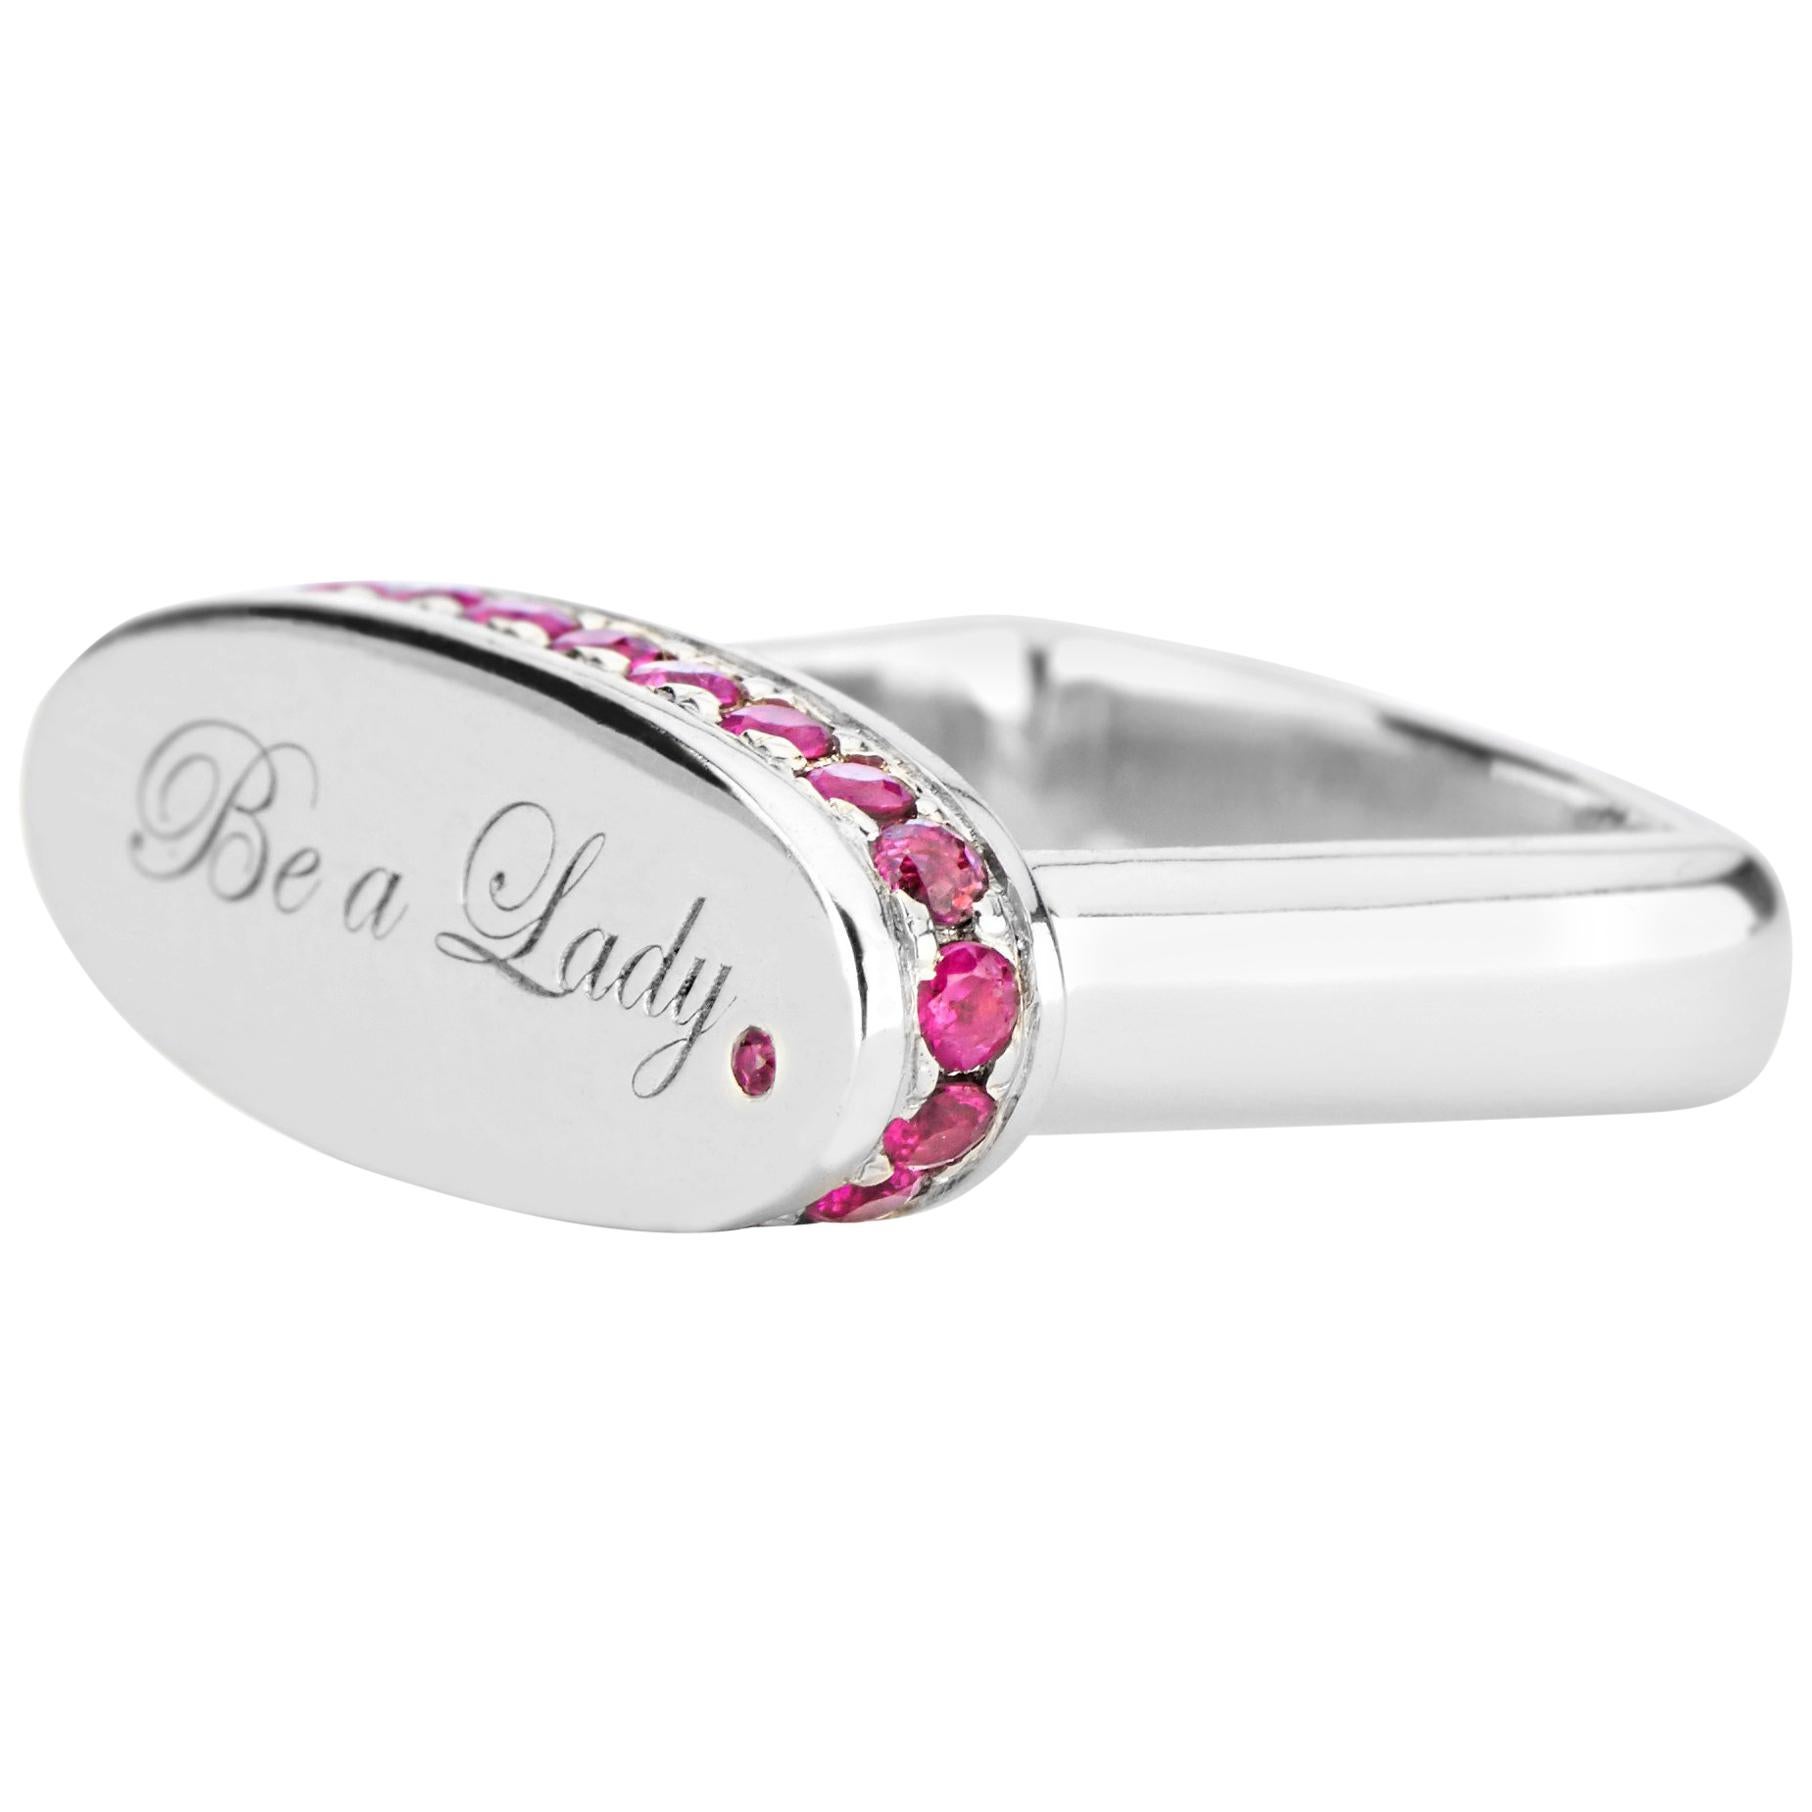 Engraved Sterling Silver and Pink Sapphires "Be a Lady." Signet Ring For Sale